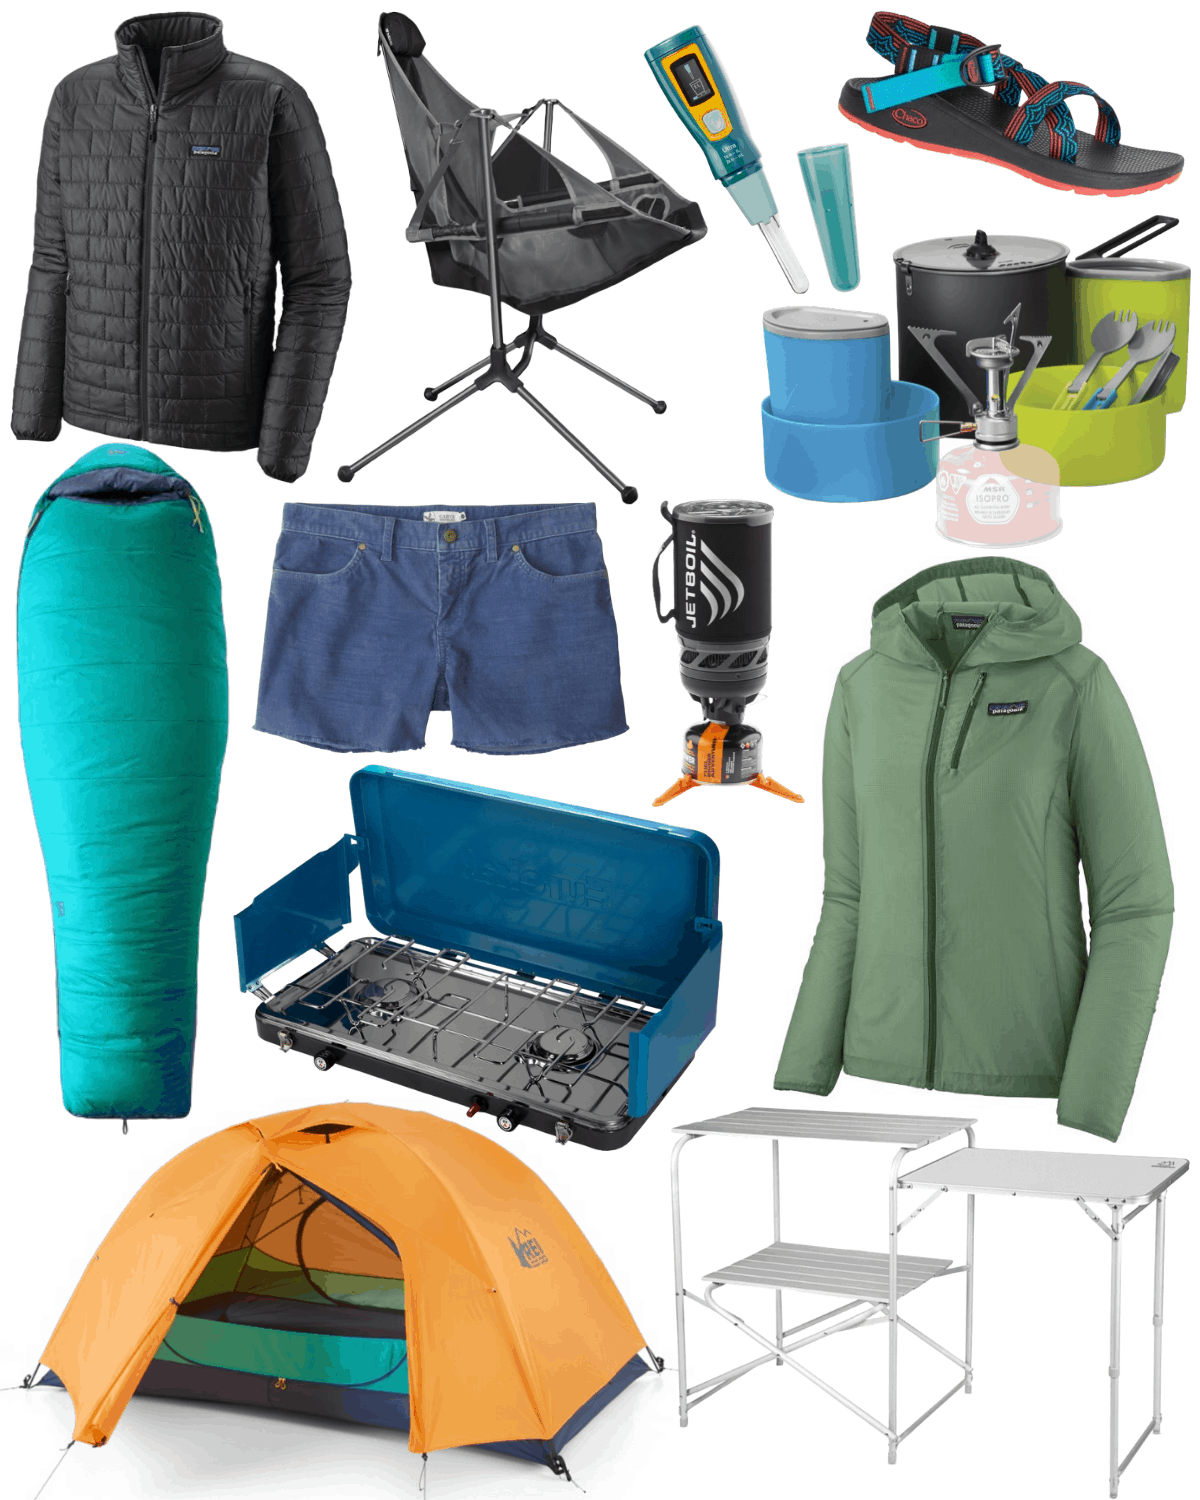 REI Memorial Day Sale - Get Everything You Need For Summer